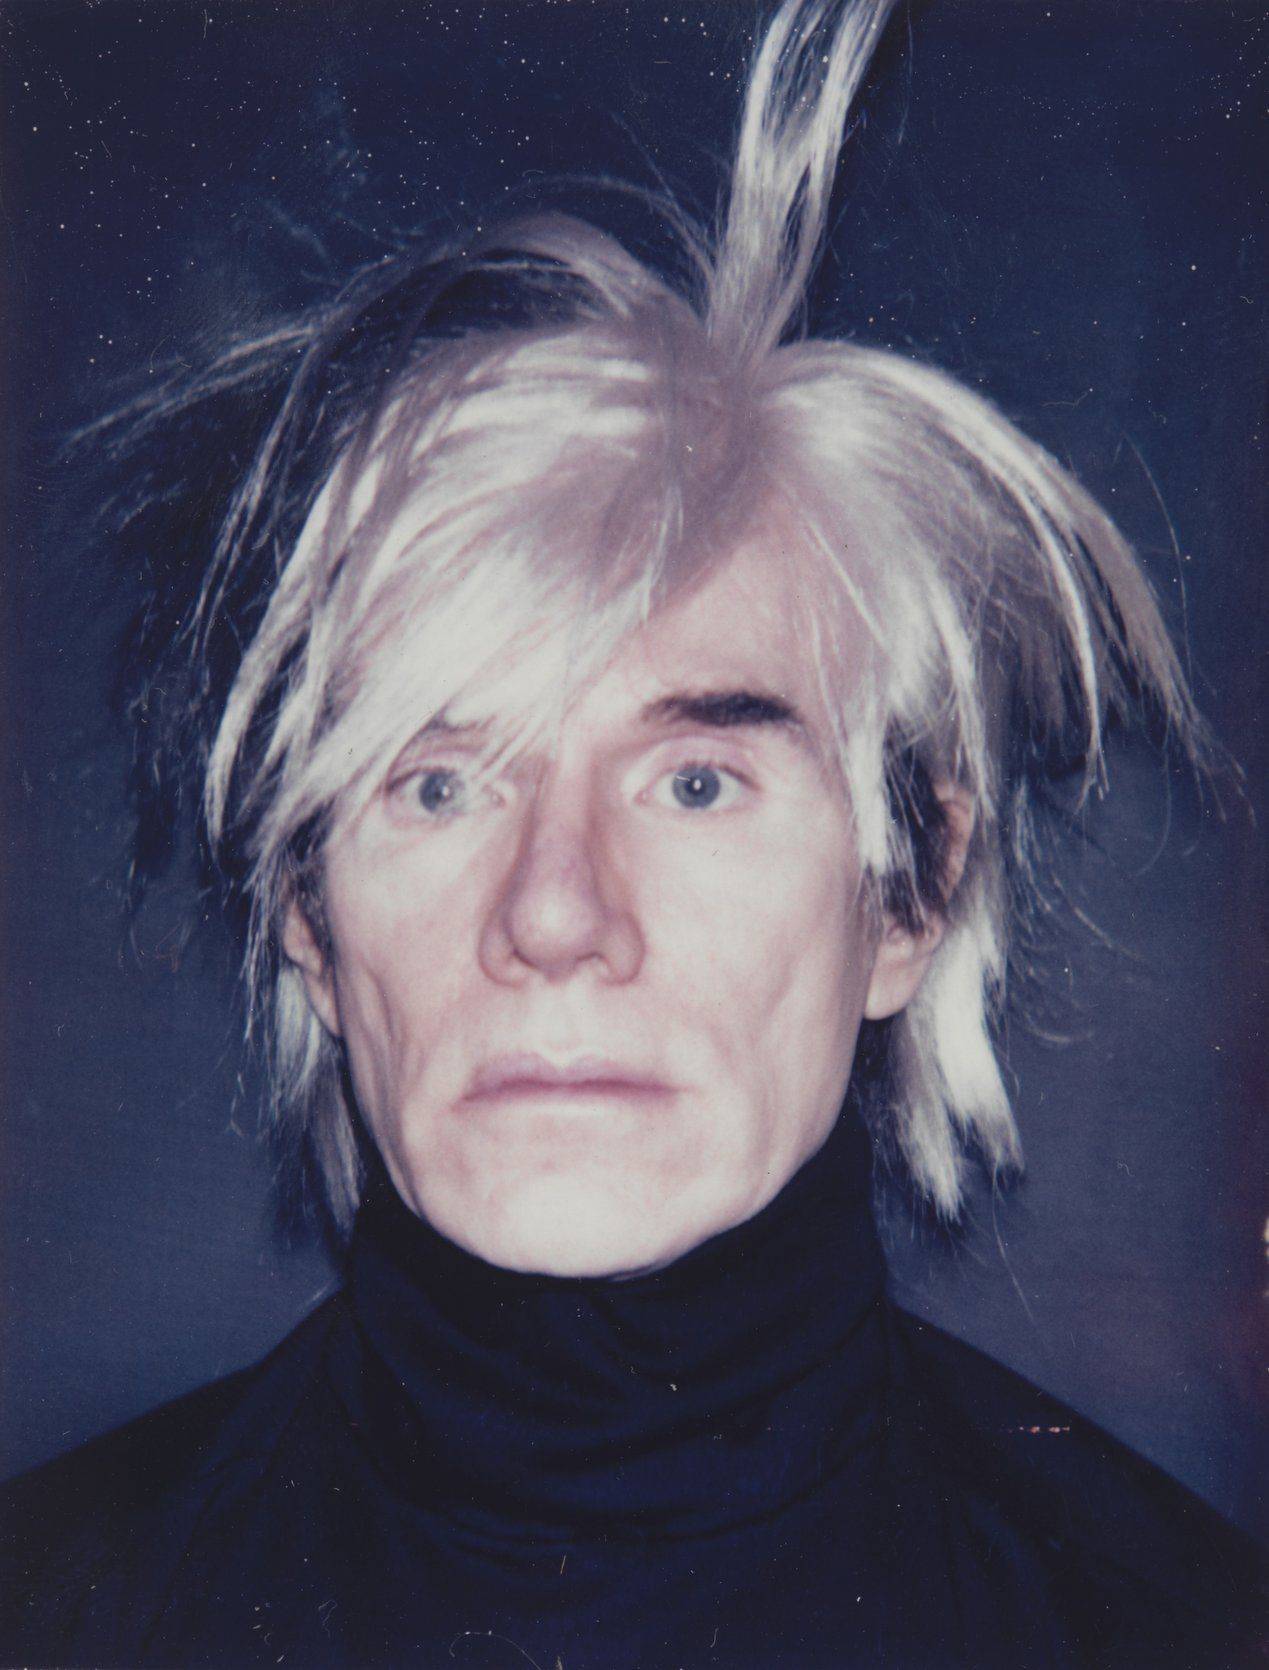 Andy Warhol Self-Portrait with Fright Wig, 1986. © 2019 The Andy Warhol Foundation for the Visual Arts, Inc. / Artists Rights Society (ARS), New York
